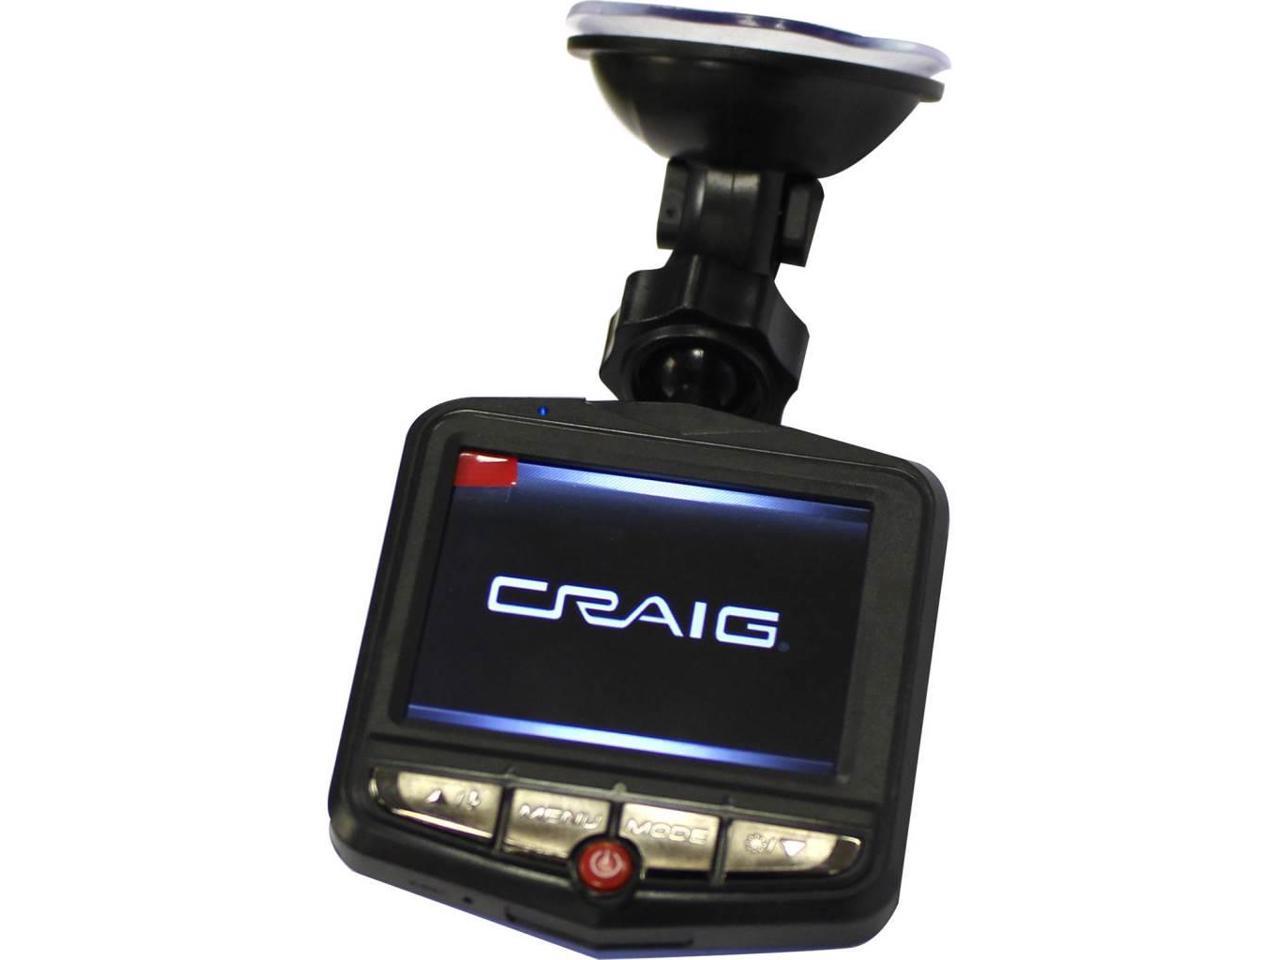 Craig 720p Dash Camera with Video Recorder, USB 2.0 Port Built-in Microphone, and Speaker